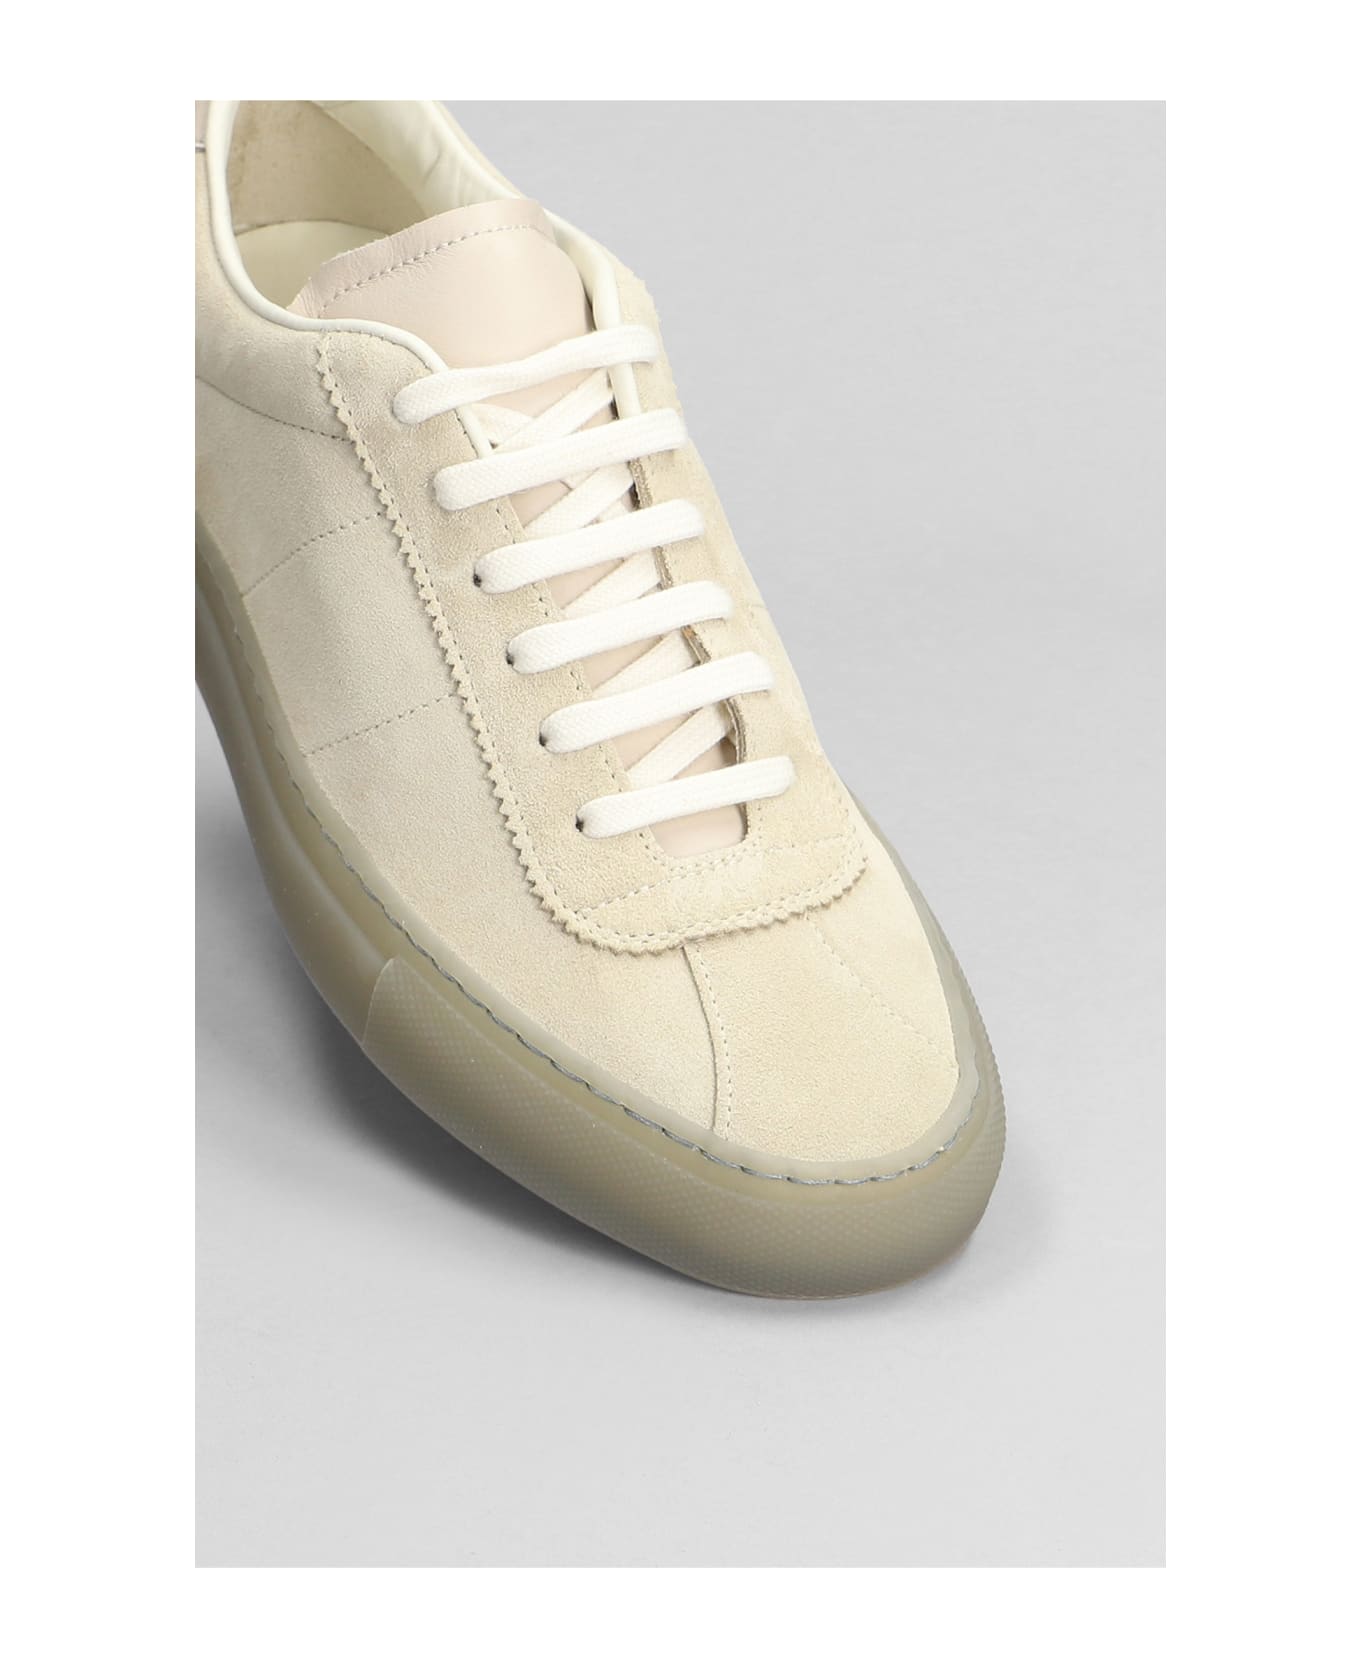 Common Projects Tennis 70 Sneakers - beige スニーカー